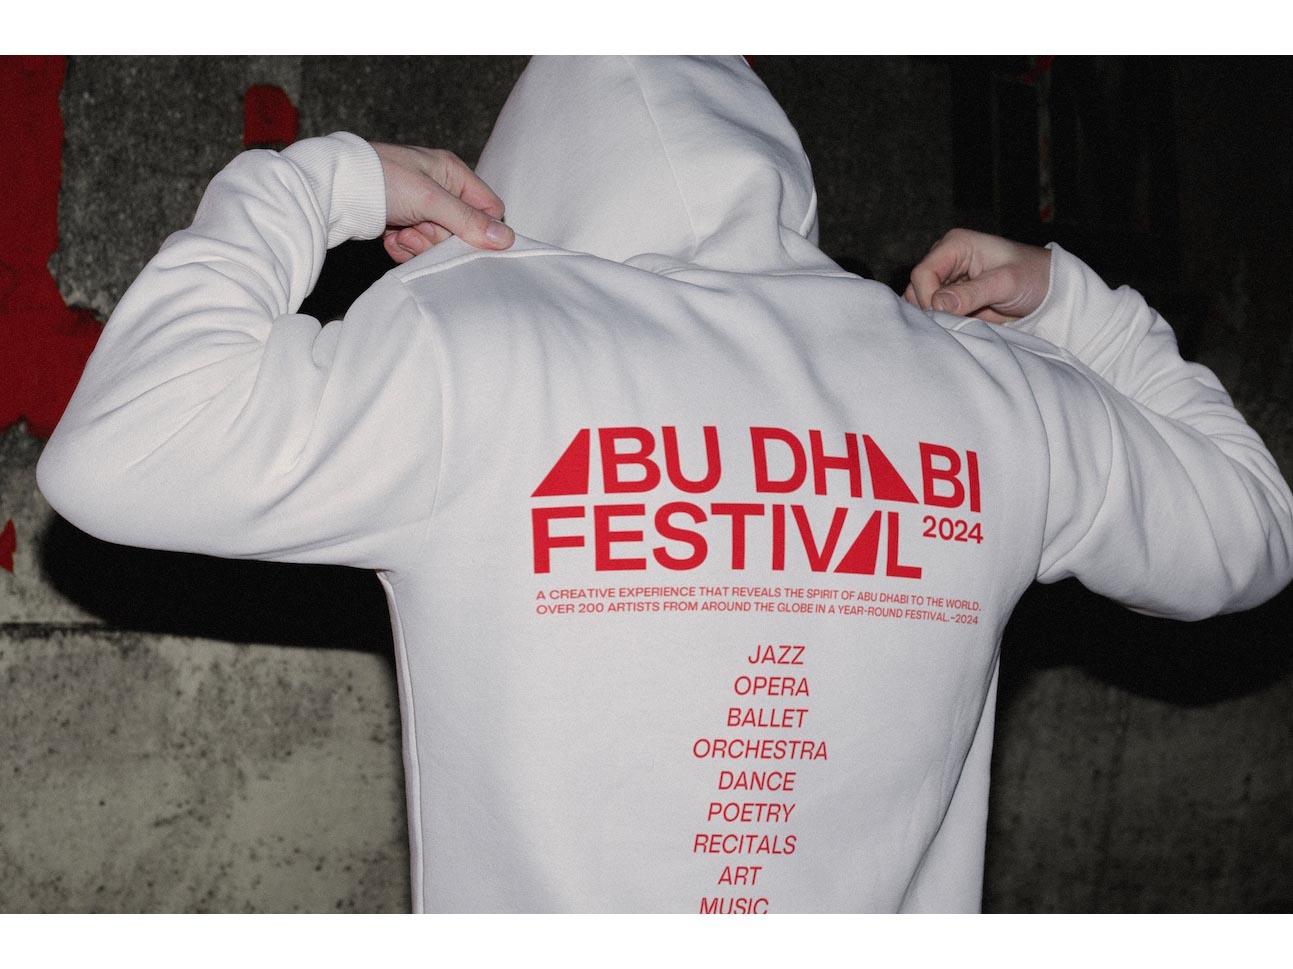 No One Branding & Design gives Abu Dhabi Festival a new look and vibe